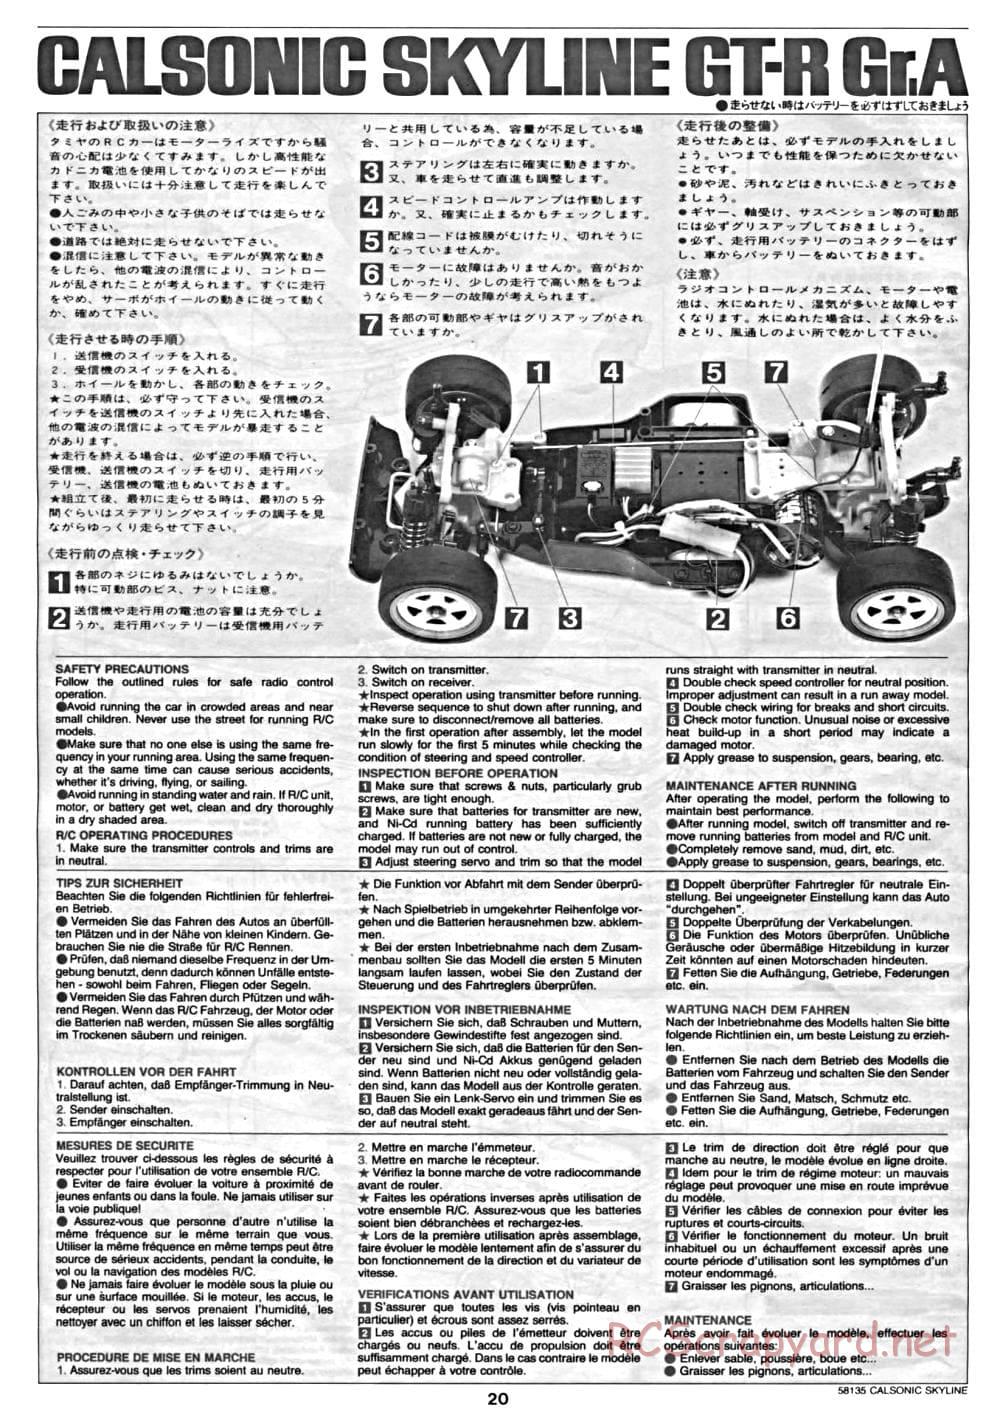 Tamiya - Calsonic Skyline GT-R Gr.A - TA-02 Chassis - Manual - Page 20